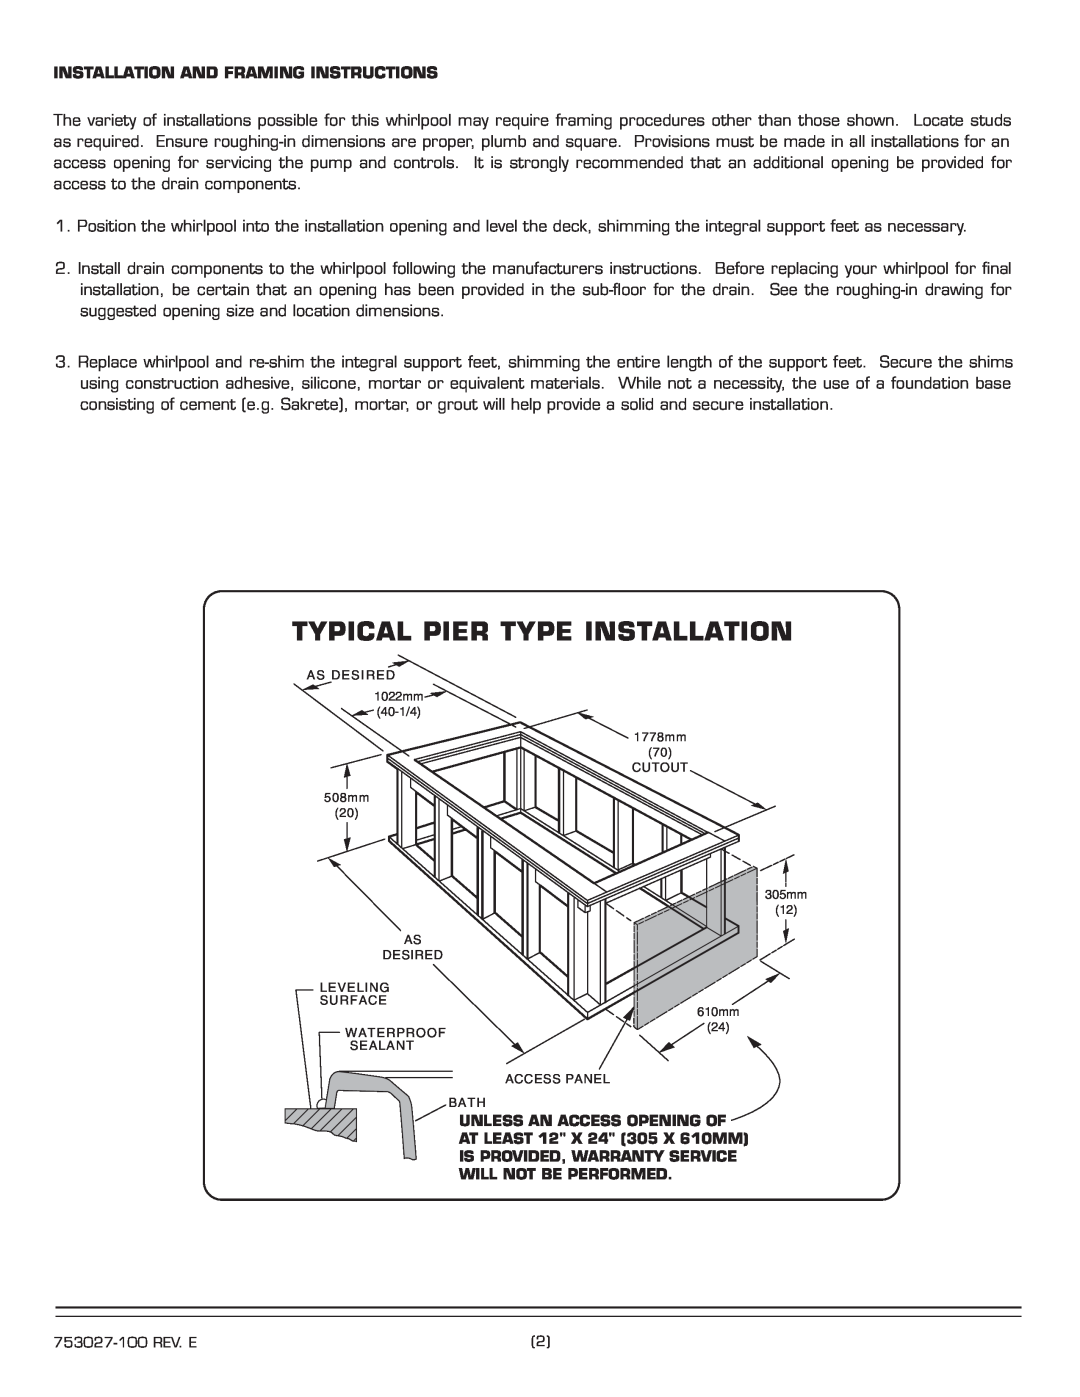 American Standard 2742.XXXW Series Typical Pier Type Installation, Installation And Framing Instructions 